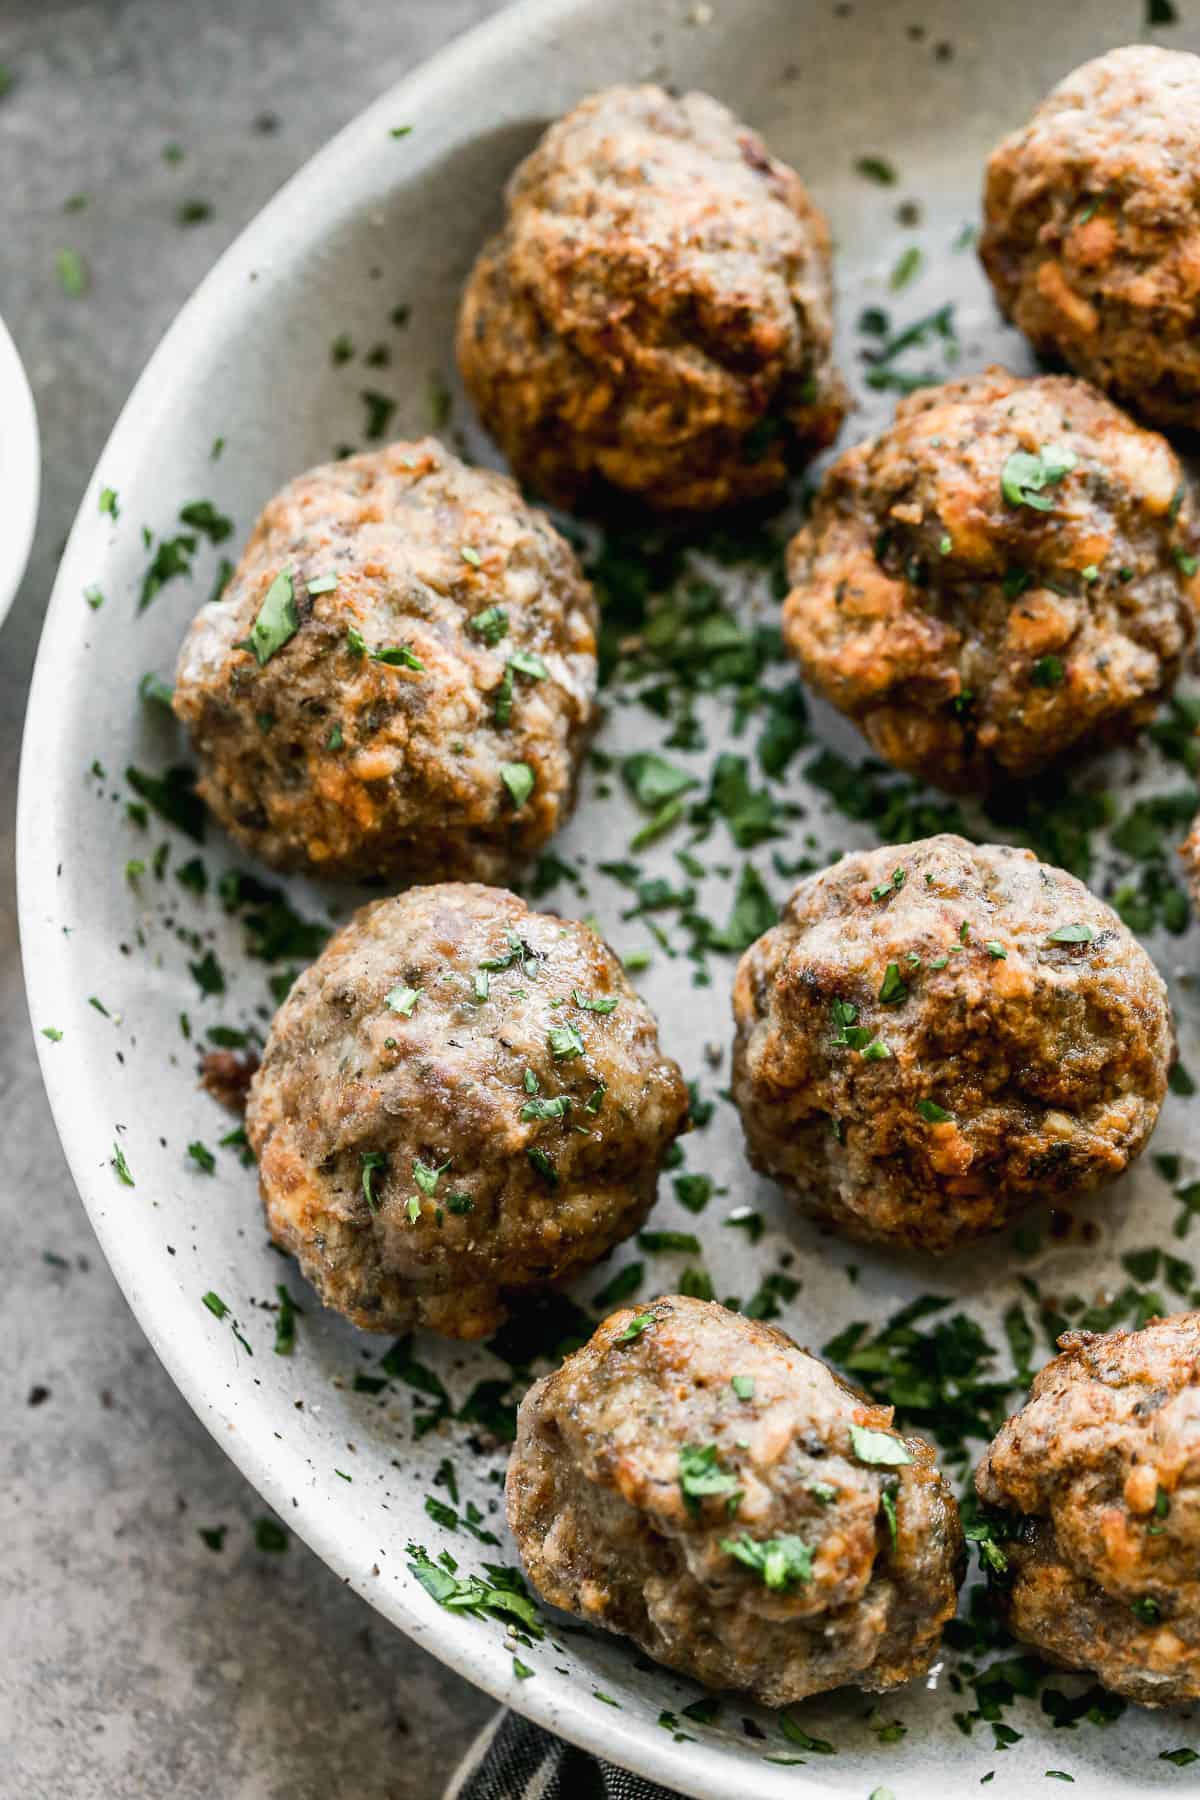 A plate filled with homemade Air Fryer Meatballs, ready to serve or freeze for another day.